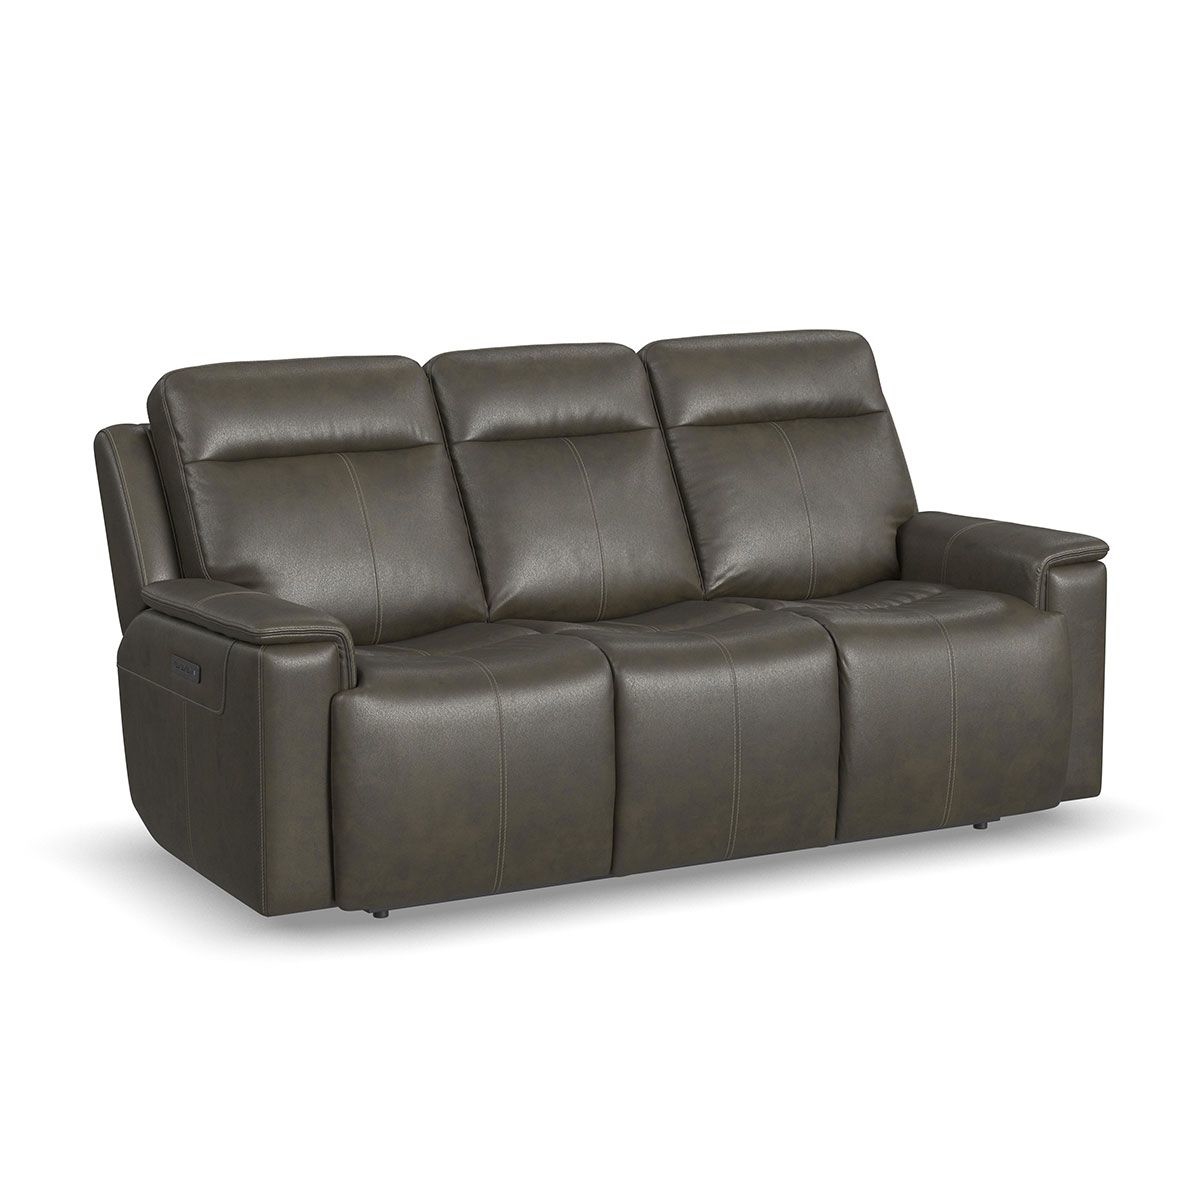 Sofas Odell Power Reclining Sofa With